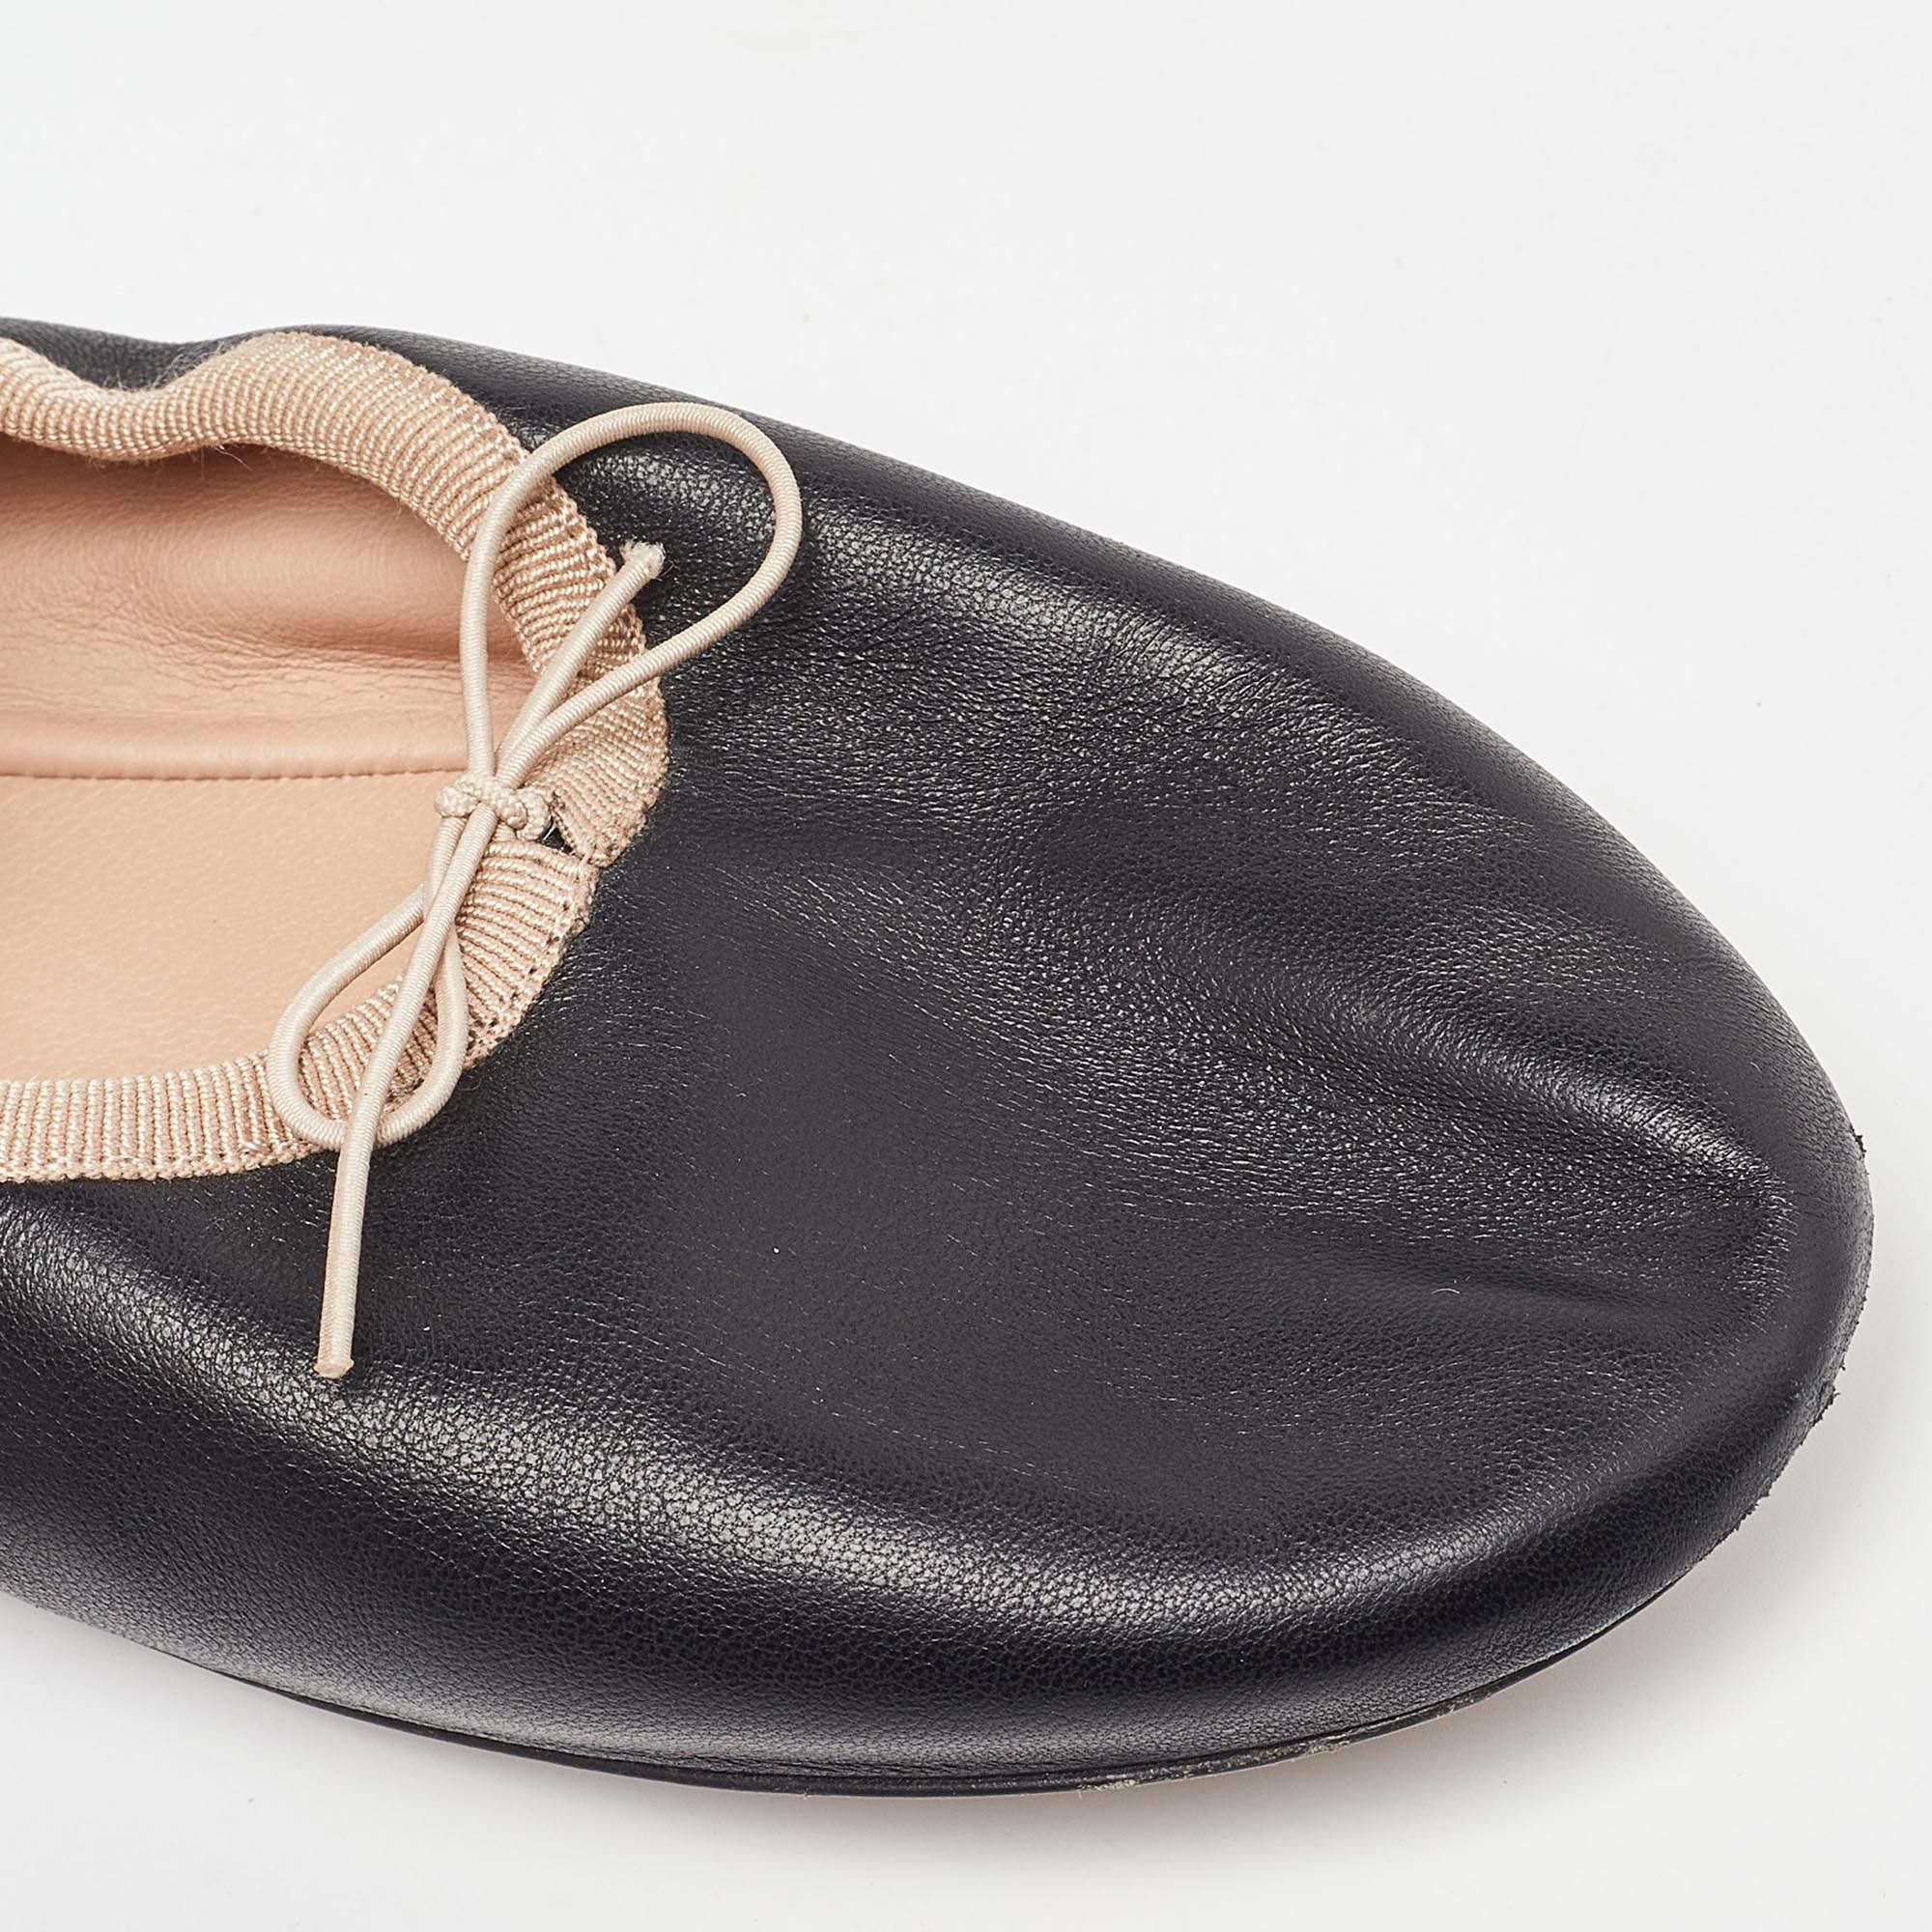 Complete your look by adding these designer ballet flats to your collection of everyday footwear. They are crafted skilfully to grant the perfect fit and style.

